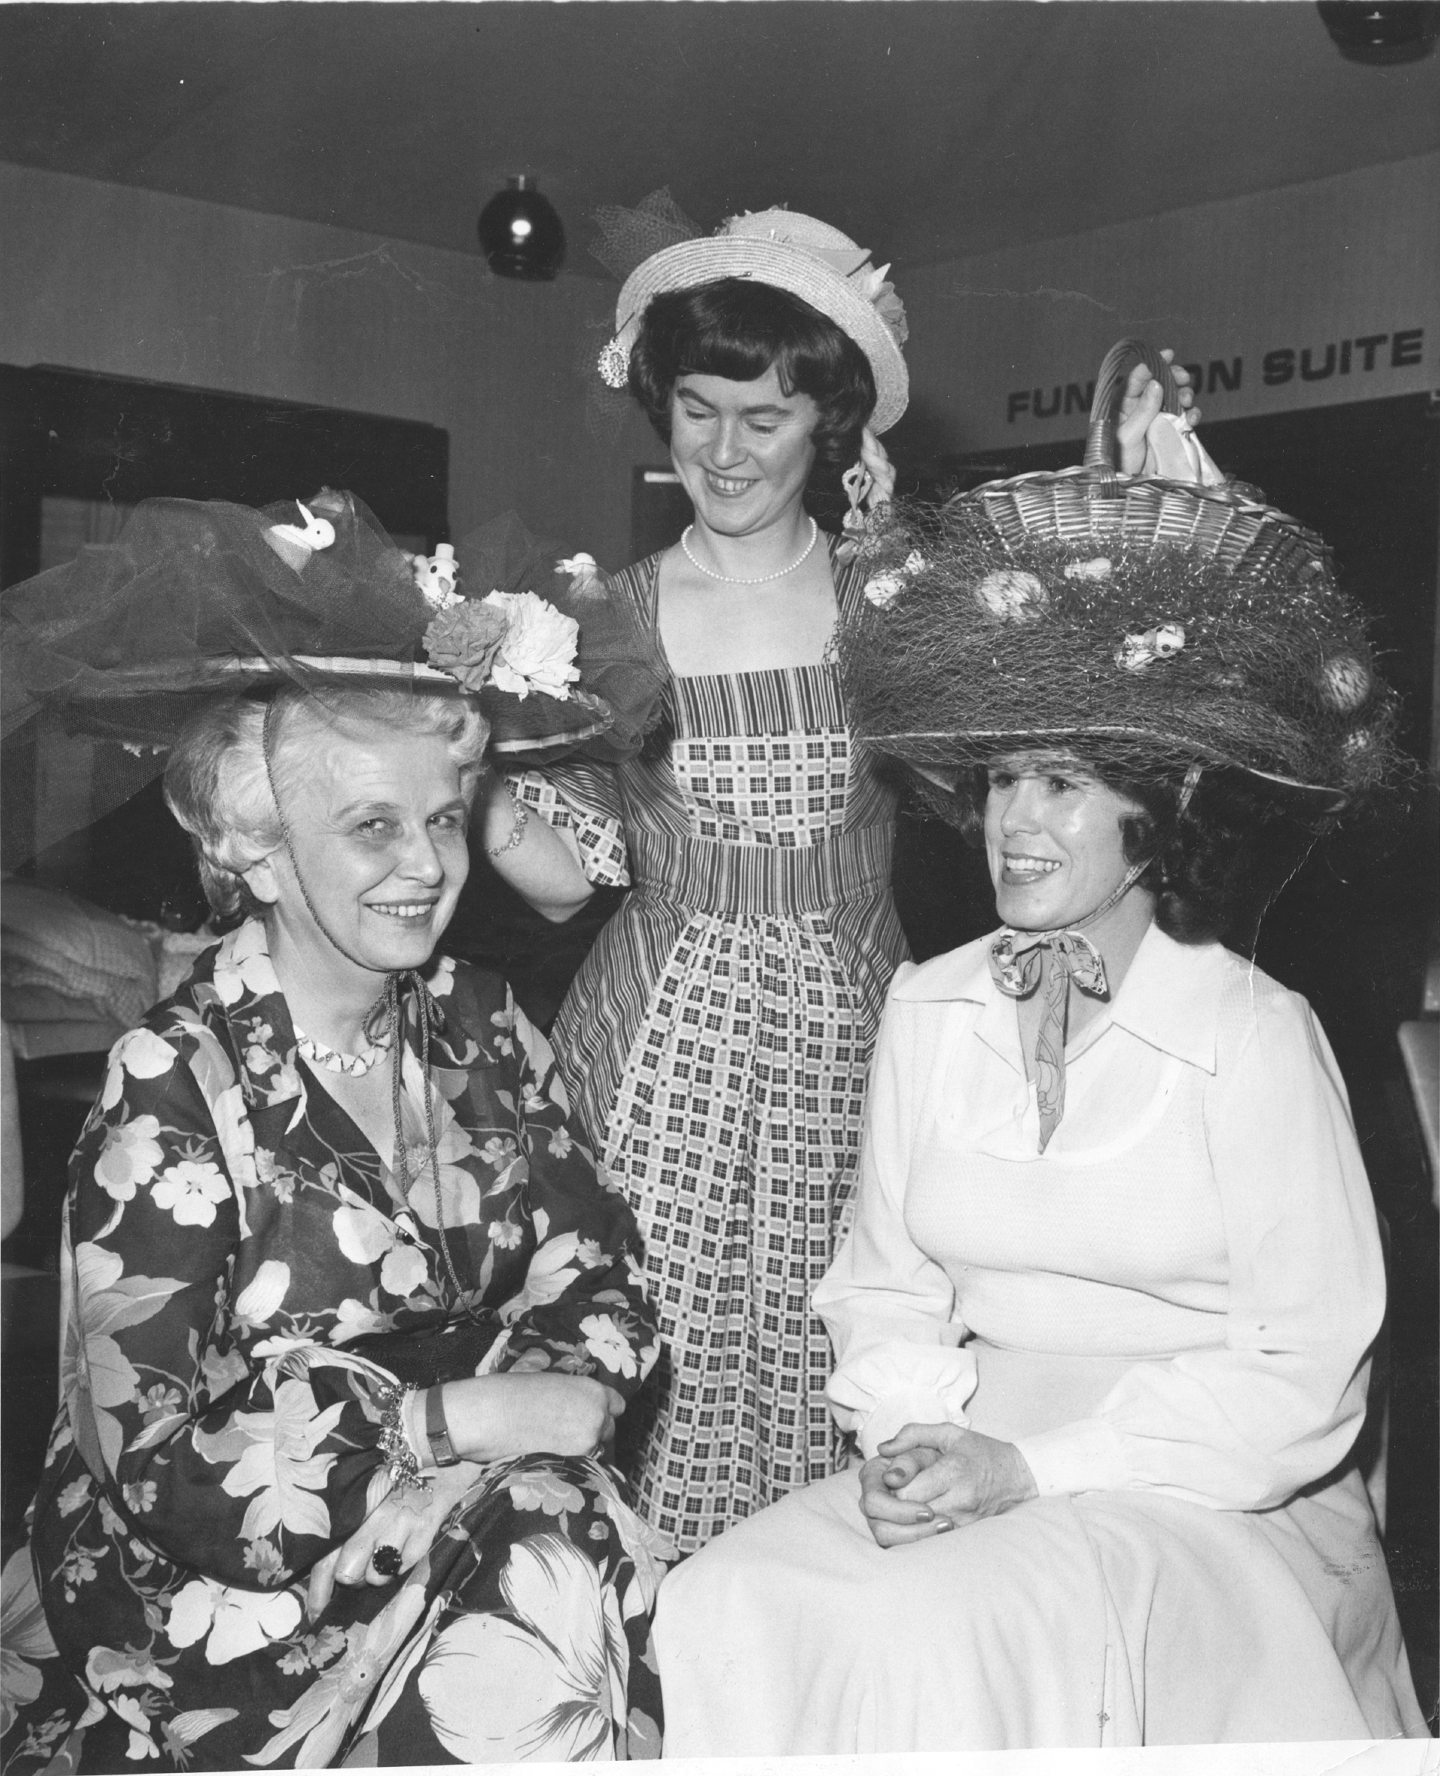 Three members of the Petroleum Women's Club of Scotland show off their Easter bonnet creations during their get-together at the Westhill Inn in 1978.